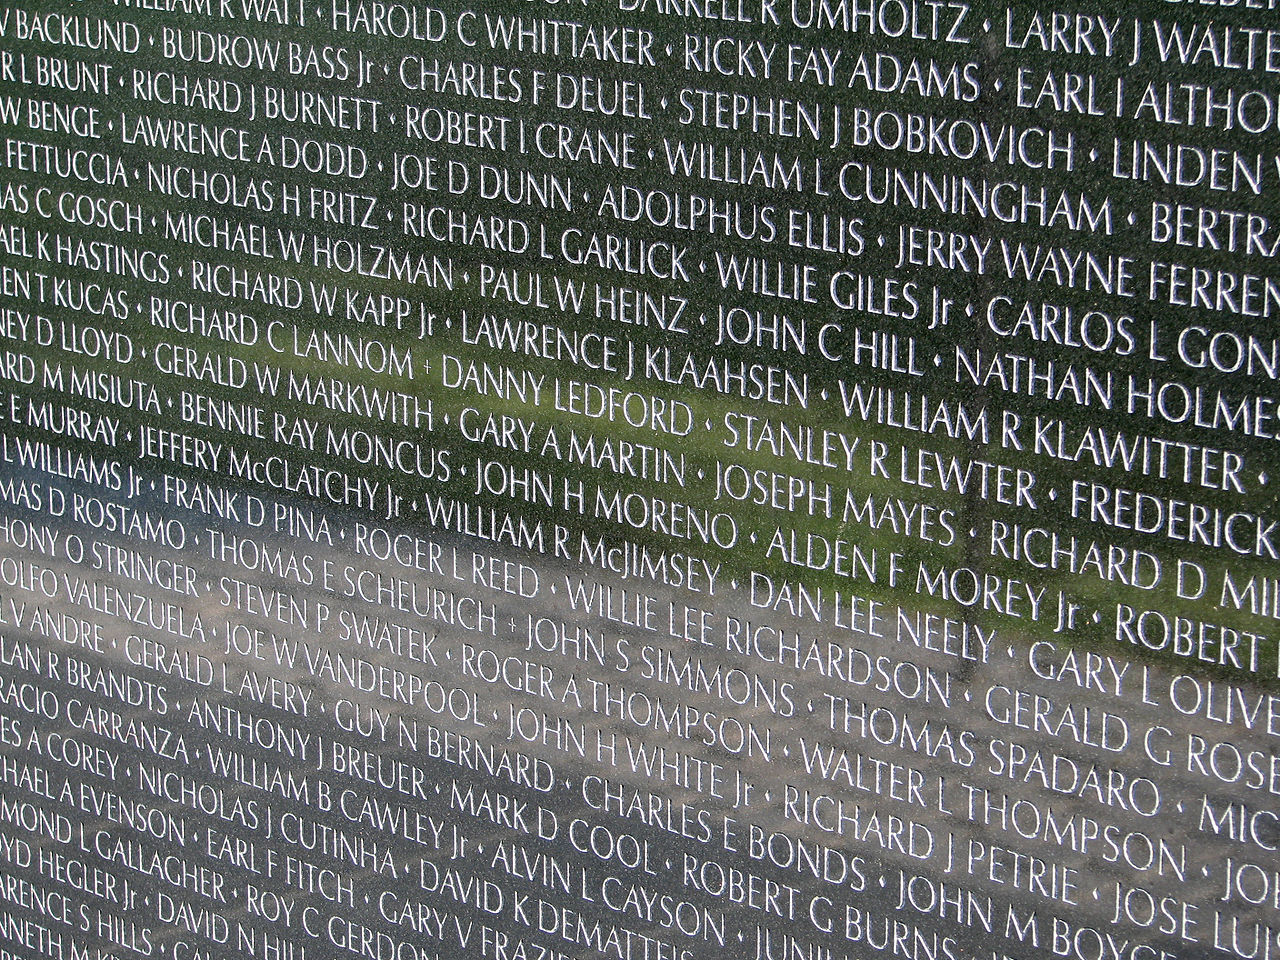 One panel of The Wall, displaying some of the names of fallen U.S. service members from the Vietnam War. Hu Totya - CC BY-SA 4.0